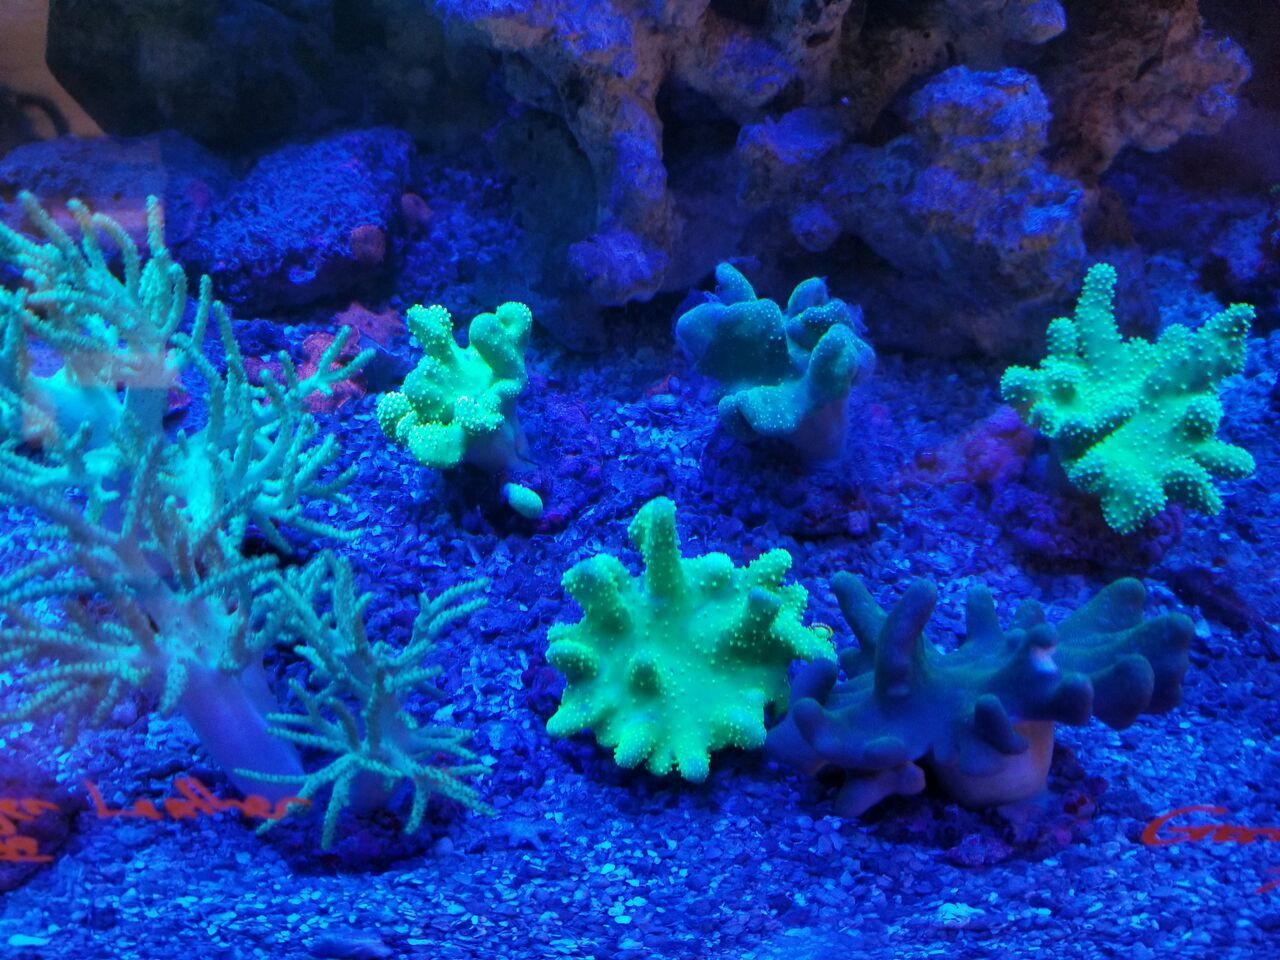 20171021 110722 preview zpsqkffhuf1 - Clams, Euphyllia, Zoas, Shrooms, Leathers, And A Whole Lot More!!!